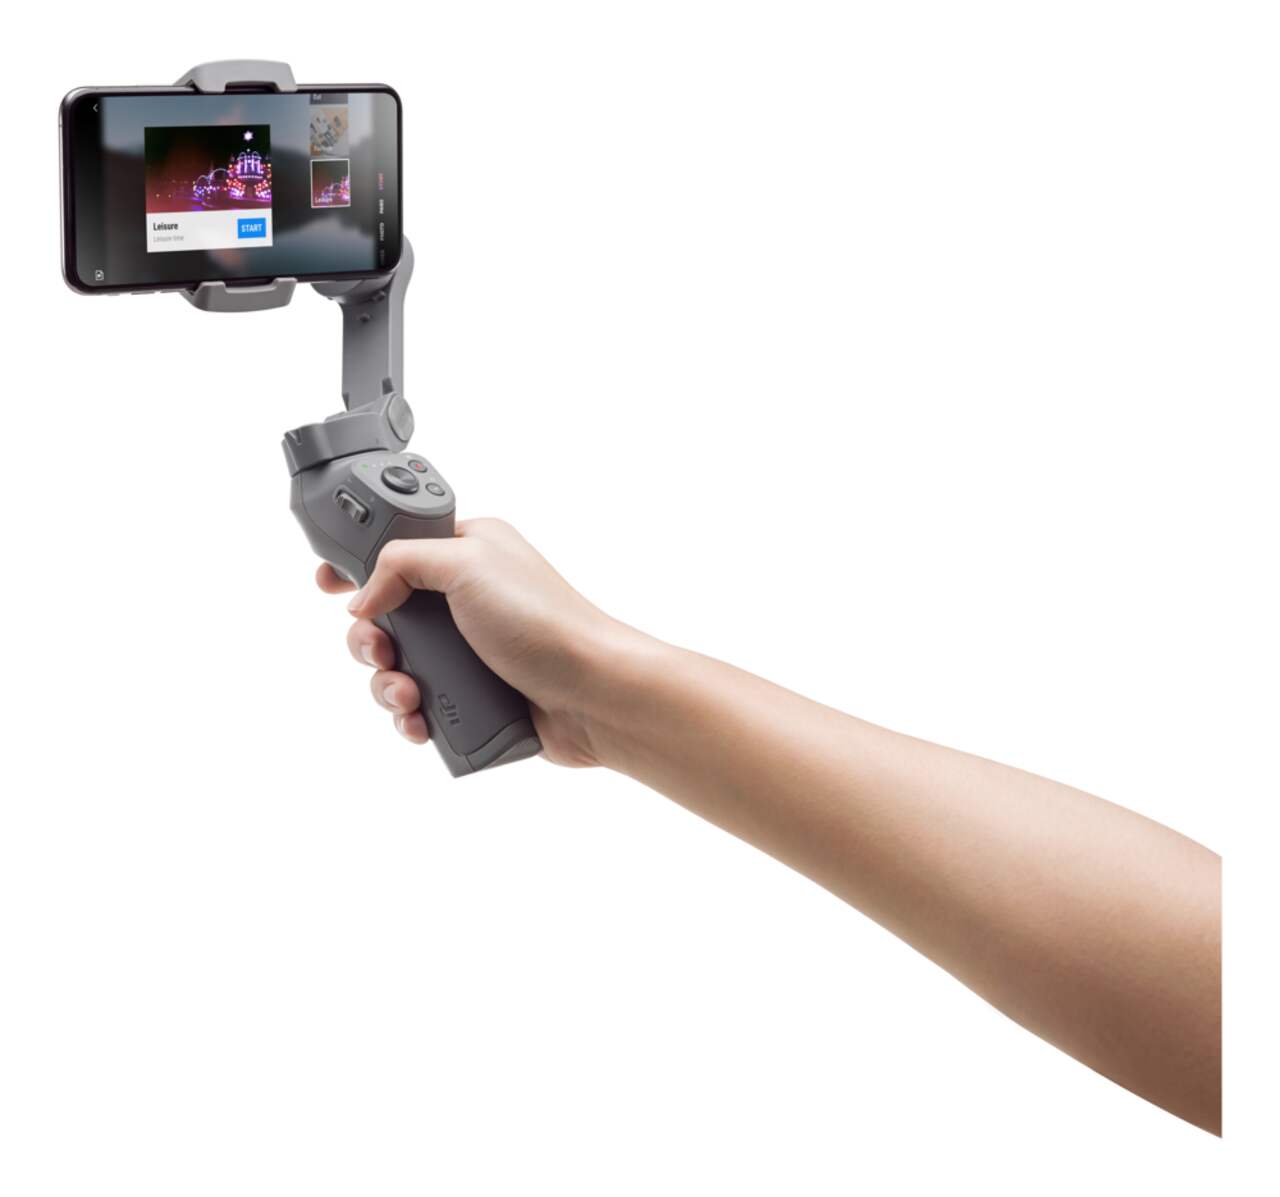 DJI Osmo Mobile 3 Axis Smartphone Gimbal Handheld Stabilizer for